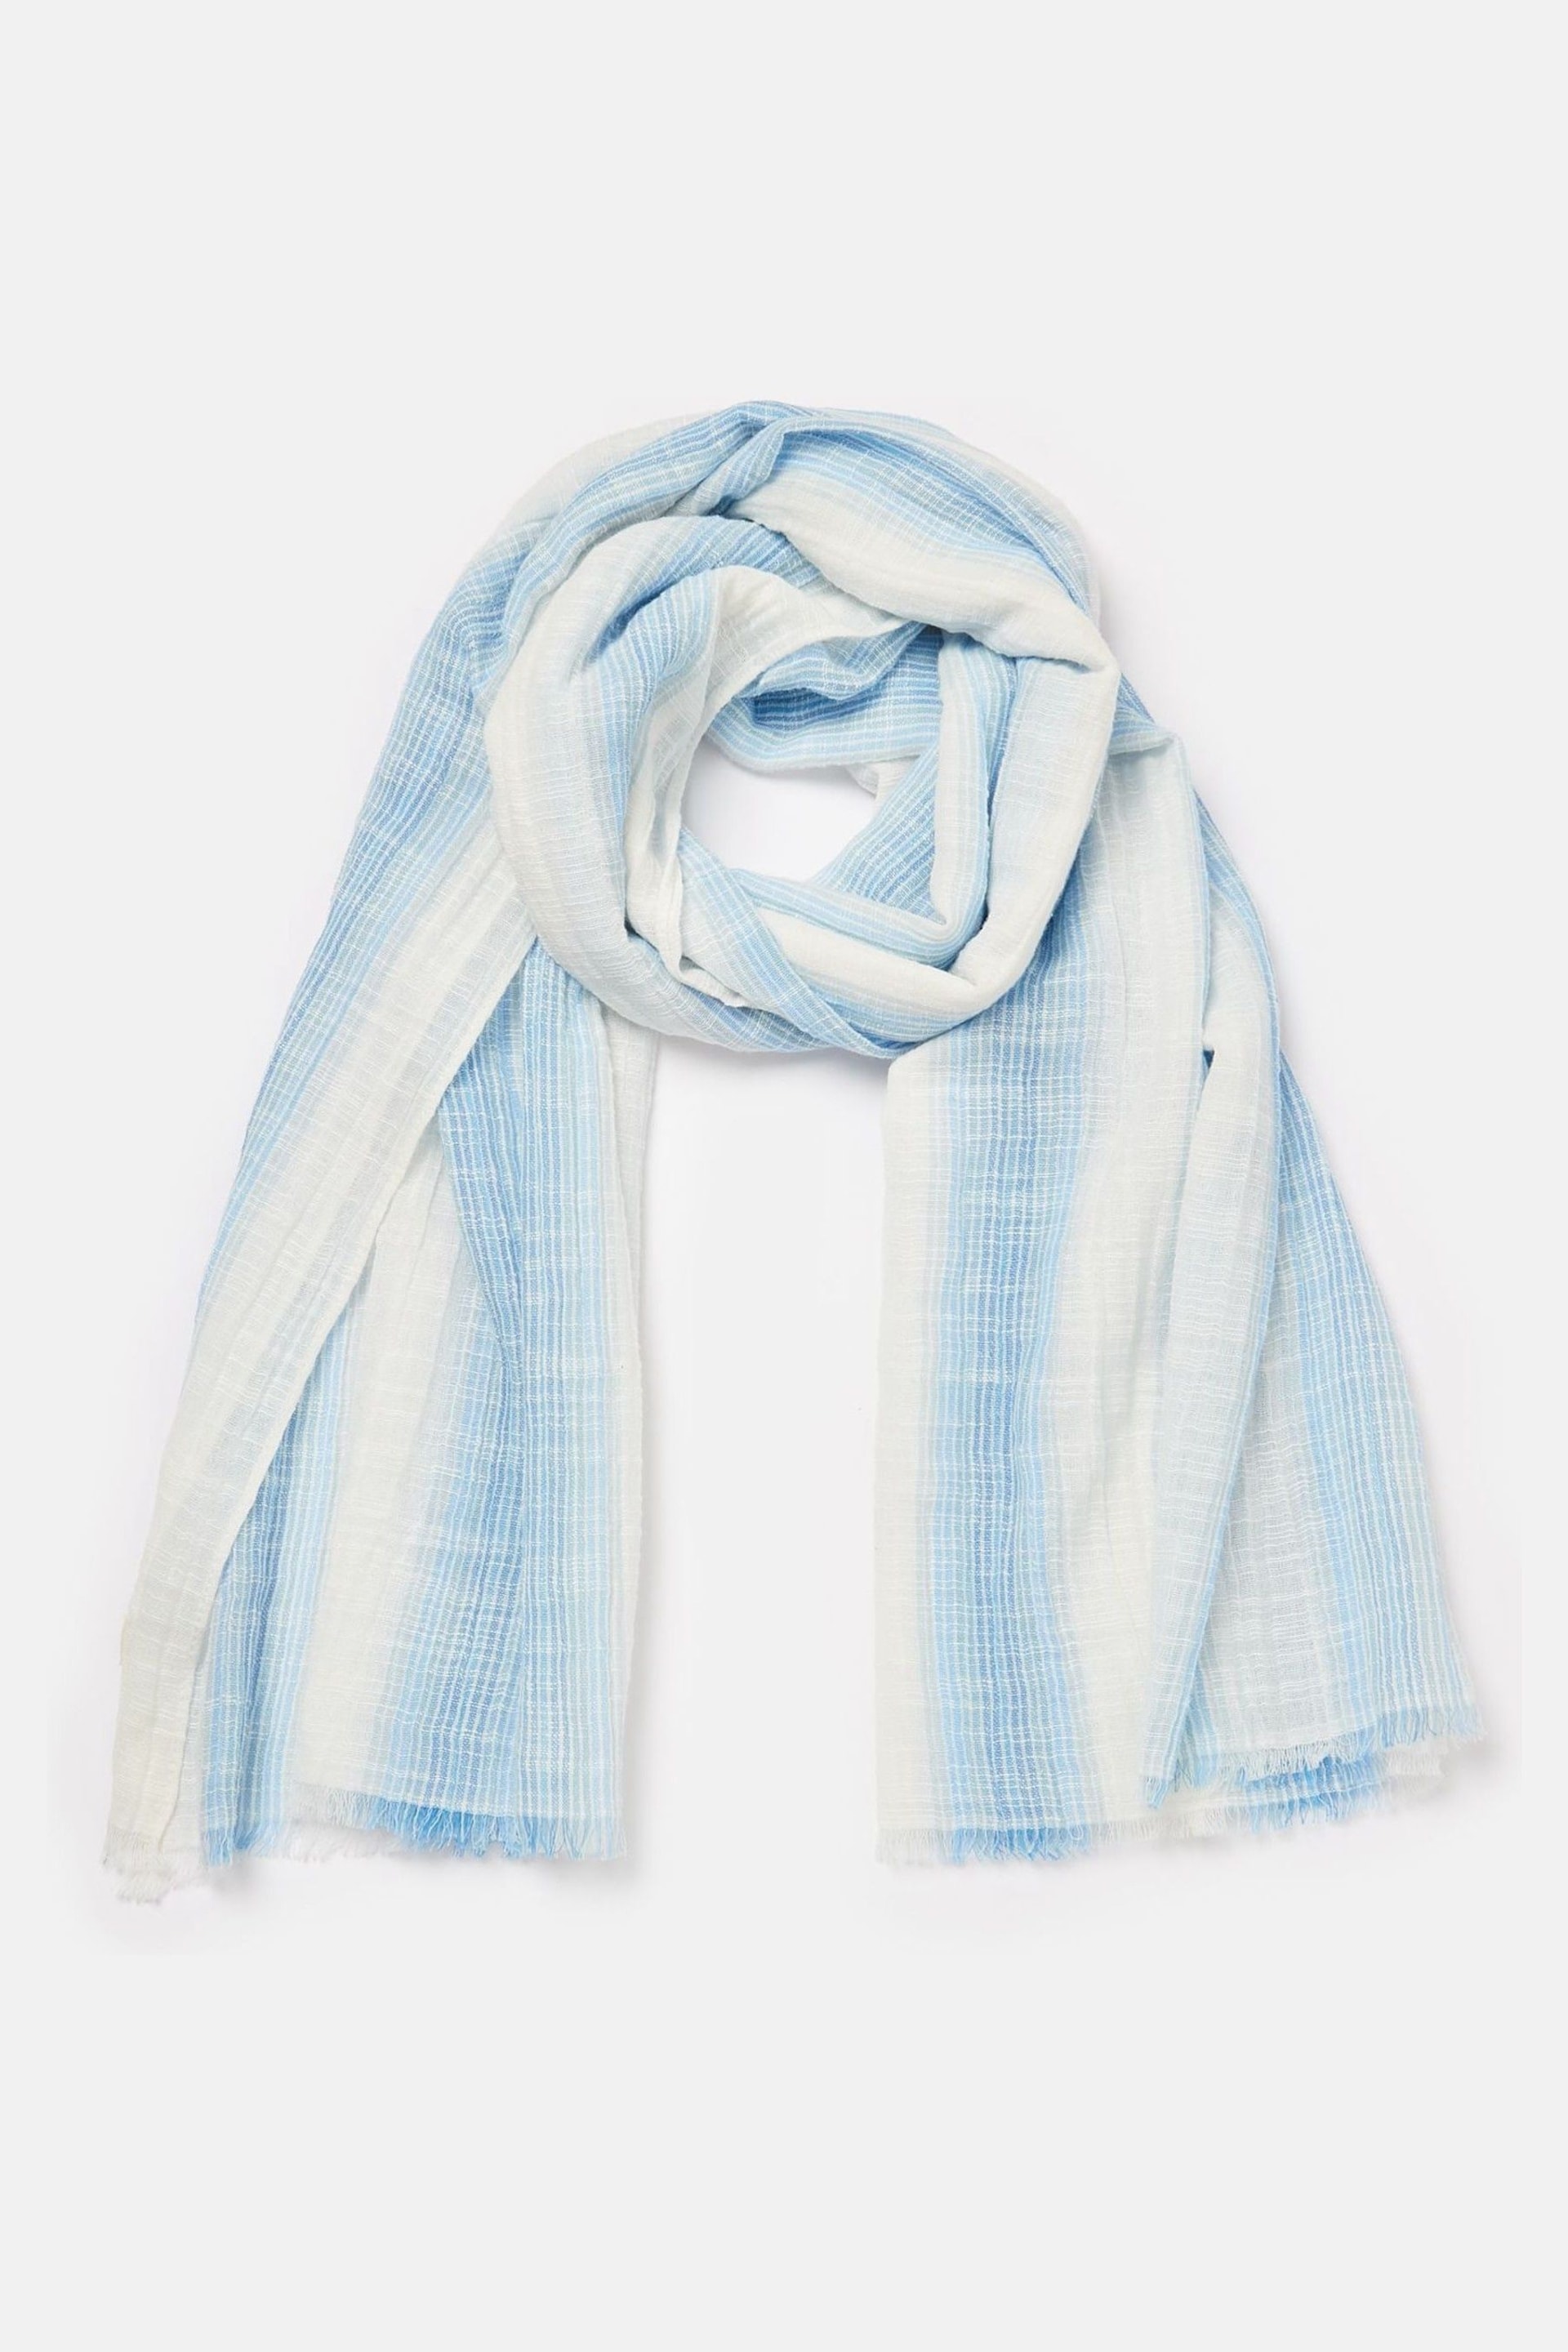 Joules Orla Blue/White Scarf - Image 2 of 4